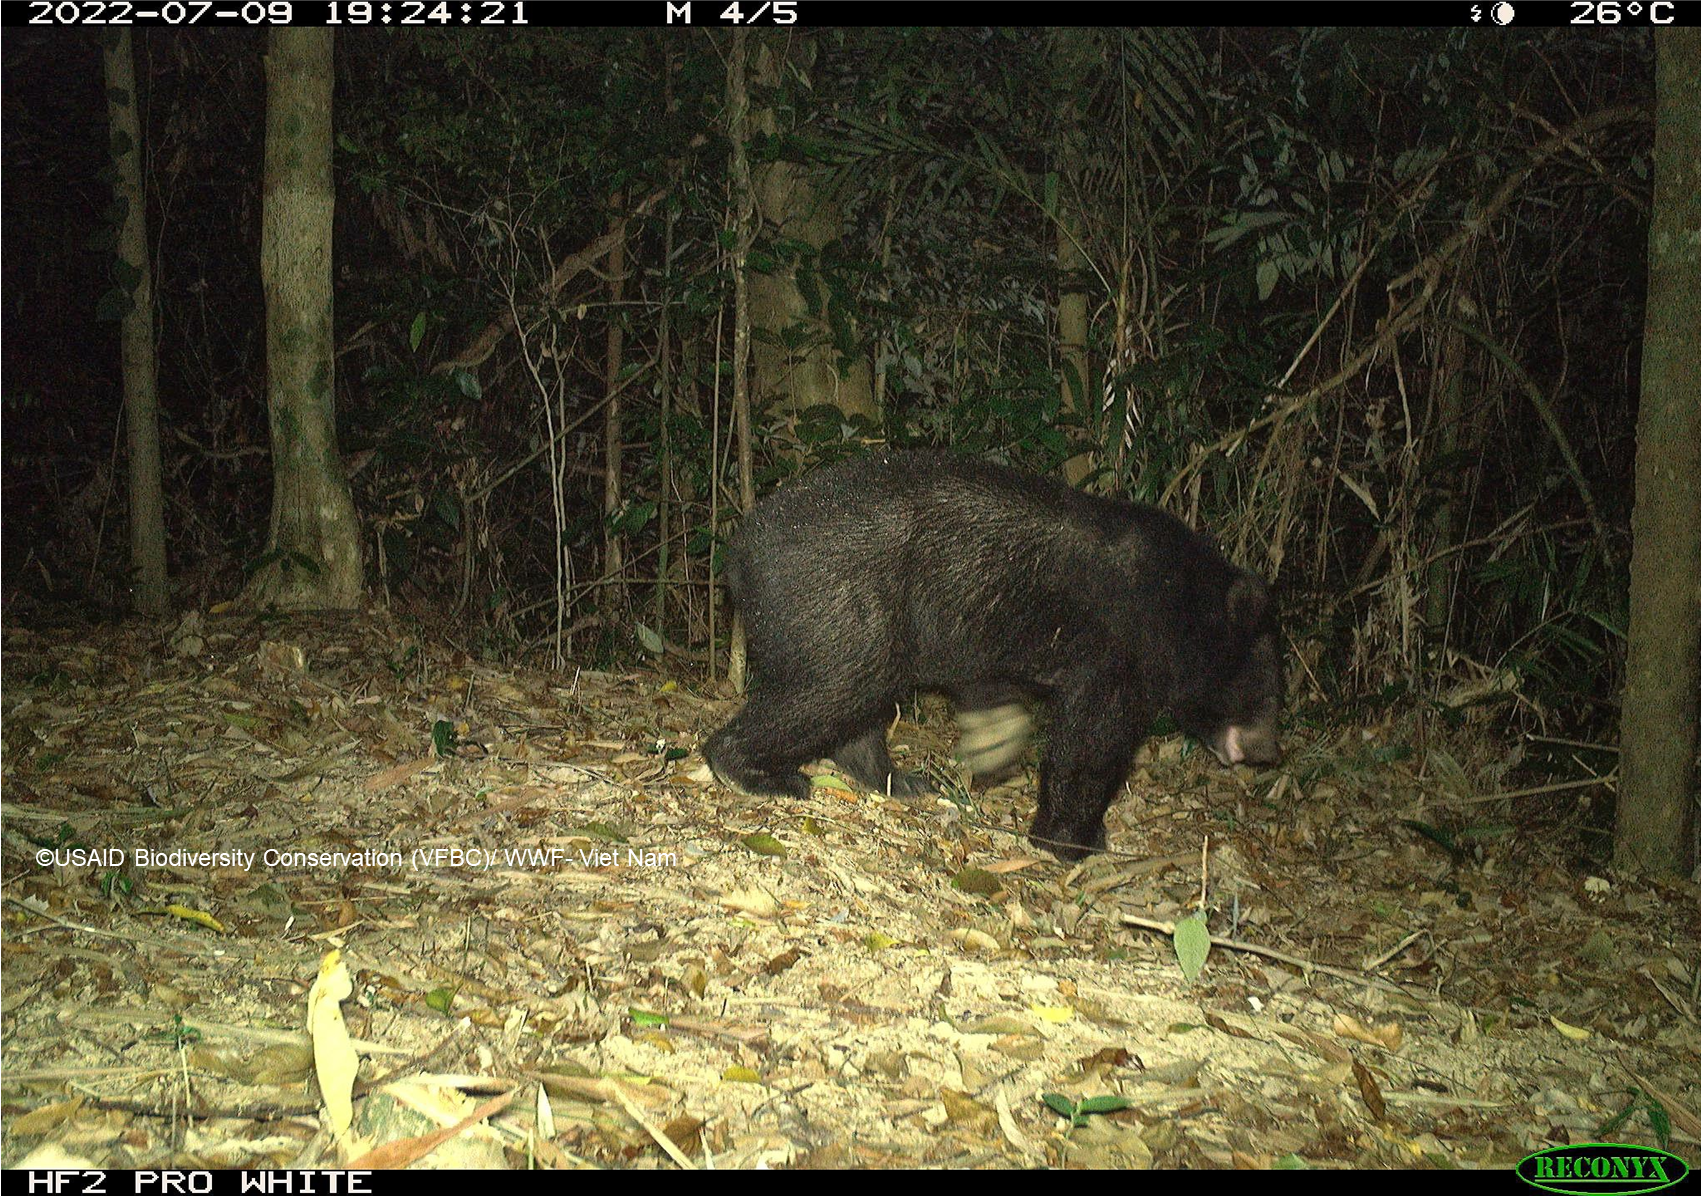 A camera trap photo shows a Asiatic black bear at the Dong Chau-Khe Nuoc Trong Biosphere Reserve in Quang Binh Province, central Vietnam, July 2022. Photo: WWF Vietnam